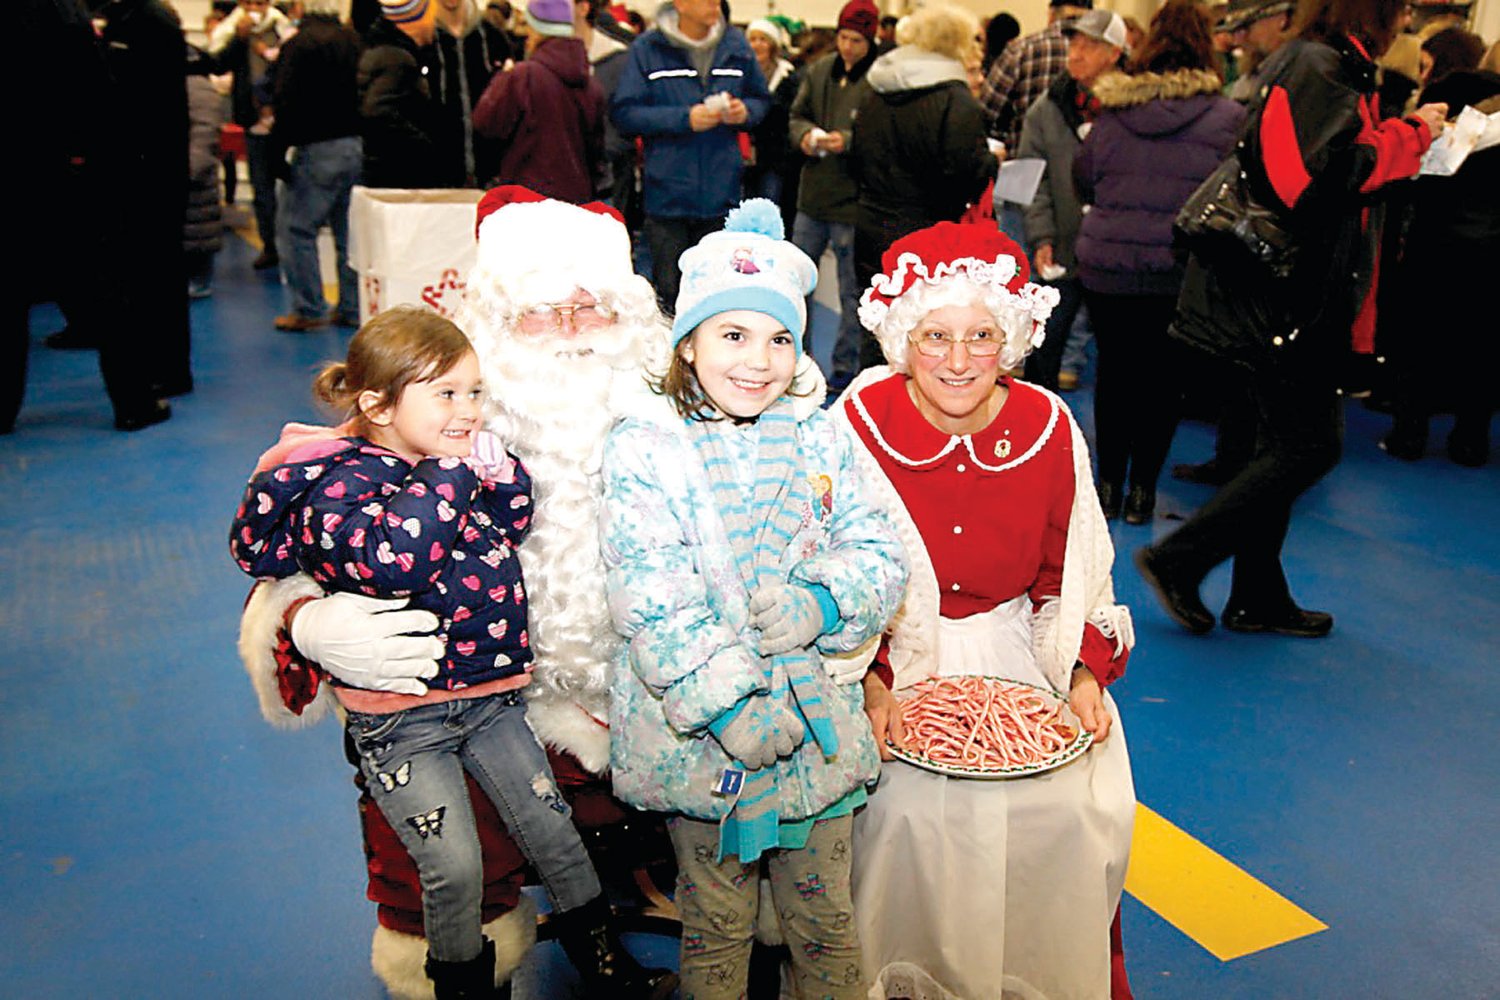 Marni Rambo and Kaylee Alles are delighted to visit with Santa and Mrs. Claus.  Photograph by Chris Ruvo.